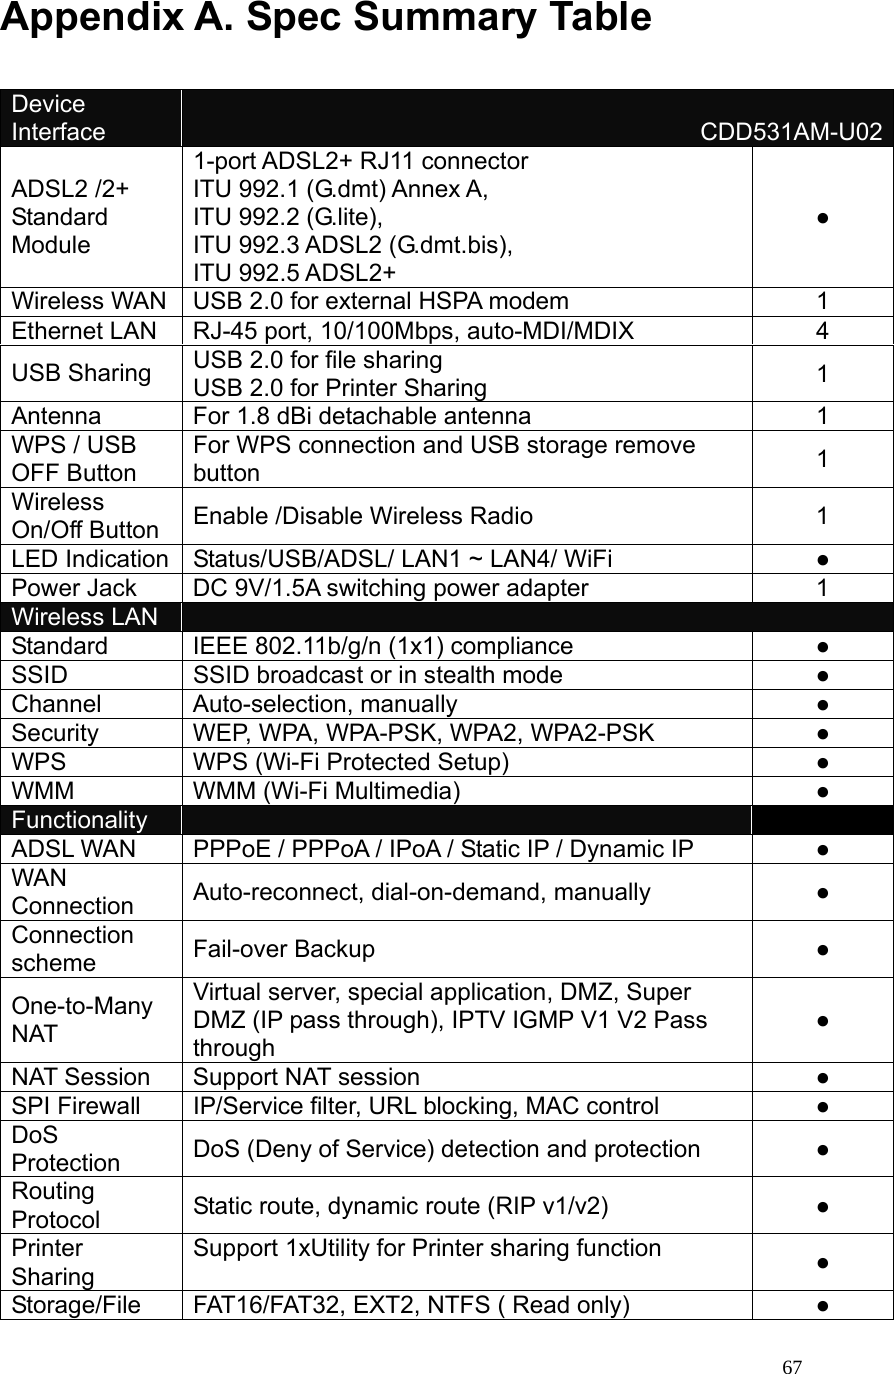  67Appendix A. Spec Summary Table  Device  Interface  CDD531AM-U02ADSL2 /2+   Standard Module  1-port ADSL2+ RJ11 connector ITU 992.1 (G.dmt) Annex A,   ITU 992.2 (G.lite),   ITU 992.3 ADSL2 (G.dmt.bis),     ITU 992.5 ADSL2+     ● Wireless WAN  USB 2.0 for external HSPA modem  1 Ethernet LAN  RJ-45 port, 10/100Mbps, auto-MDI/MDIX  4 USB Sharing  USB 2.0 for file sharing   USB 2.0 for Printer Sharing  1 Antenna  For 1.8 dBi detachable antenna  1 WPS / USB OFF Button For WPS connection and USB storage remove button  1 Wireless On/Off Button  Enable /Disable Wireless Radio  1 LED Indication  Status/USB/ADSL/ LAN1 ~ LAN4/ WiFi ● Power Jack  DC 9V/1.5A switching power adapter    1 Wireless LAN     Standard IEEE 802.11b/g/n (1x1) compliance  ● SSID  SSID broadcast or in stealth mode  ● Channel Auto-selection, manually  ● Security  WEP, WPA, WPA-PSK, WPA2, WPA2-PSK  ● WPS WPS (Wi-Fi Protected Setup)  ● WMM WMM (Wi-Fi Multimedia)  ● Functionality     ADSL WAN  PPPoE / PPPoA / IPoA / Static IP / Dynamic IP  ● WAN Connection  Auto-reconnect, dial-on-demand, manually  ● Connection scheme  Fail-over Backup    ● One-to-Many NAT Virtual server, special application, DMZ, Super DMZ (IP pass through), IPTV IGMP V1 V2 Pass through ● NAT Session  Support NAT session  ● SPI Firewall  IP/Service filter, URL blocking, MAC control  ● DoS Protection  DoS (Deny of Service) detection and protection  ● Routing Protocol  Static route, dynamic route (RIP v1/v2)  ● Printer Sharing Support 1xUtility for Printer sharing function    ● Storage/File  FAT16/FAT32, EXT2, NTFS ( Read only)  ● 